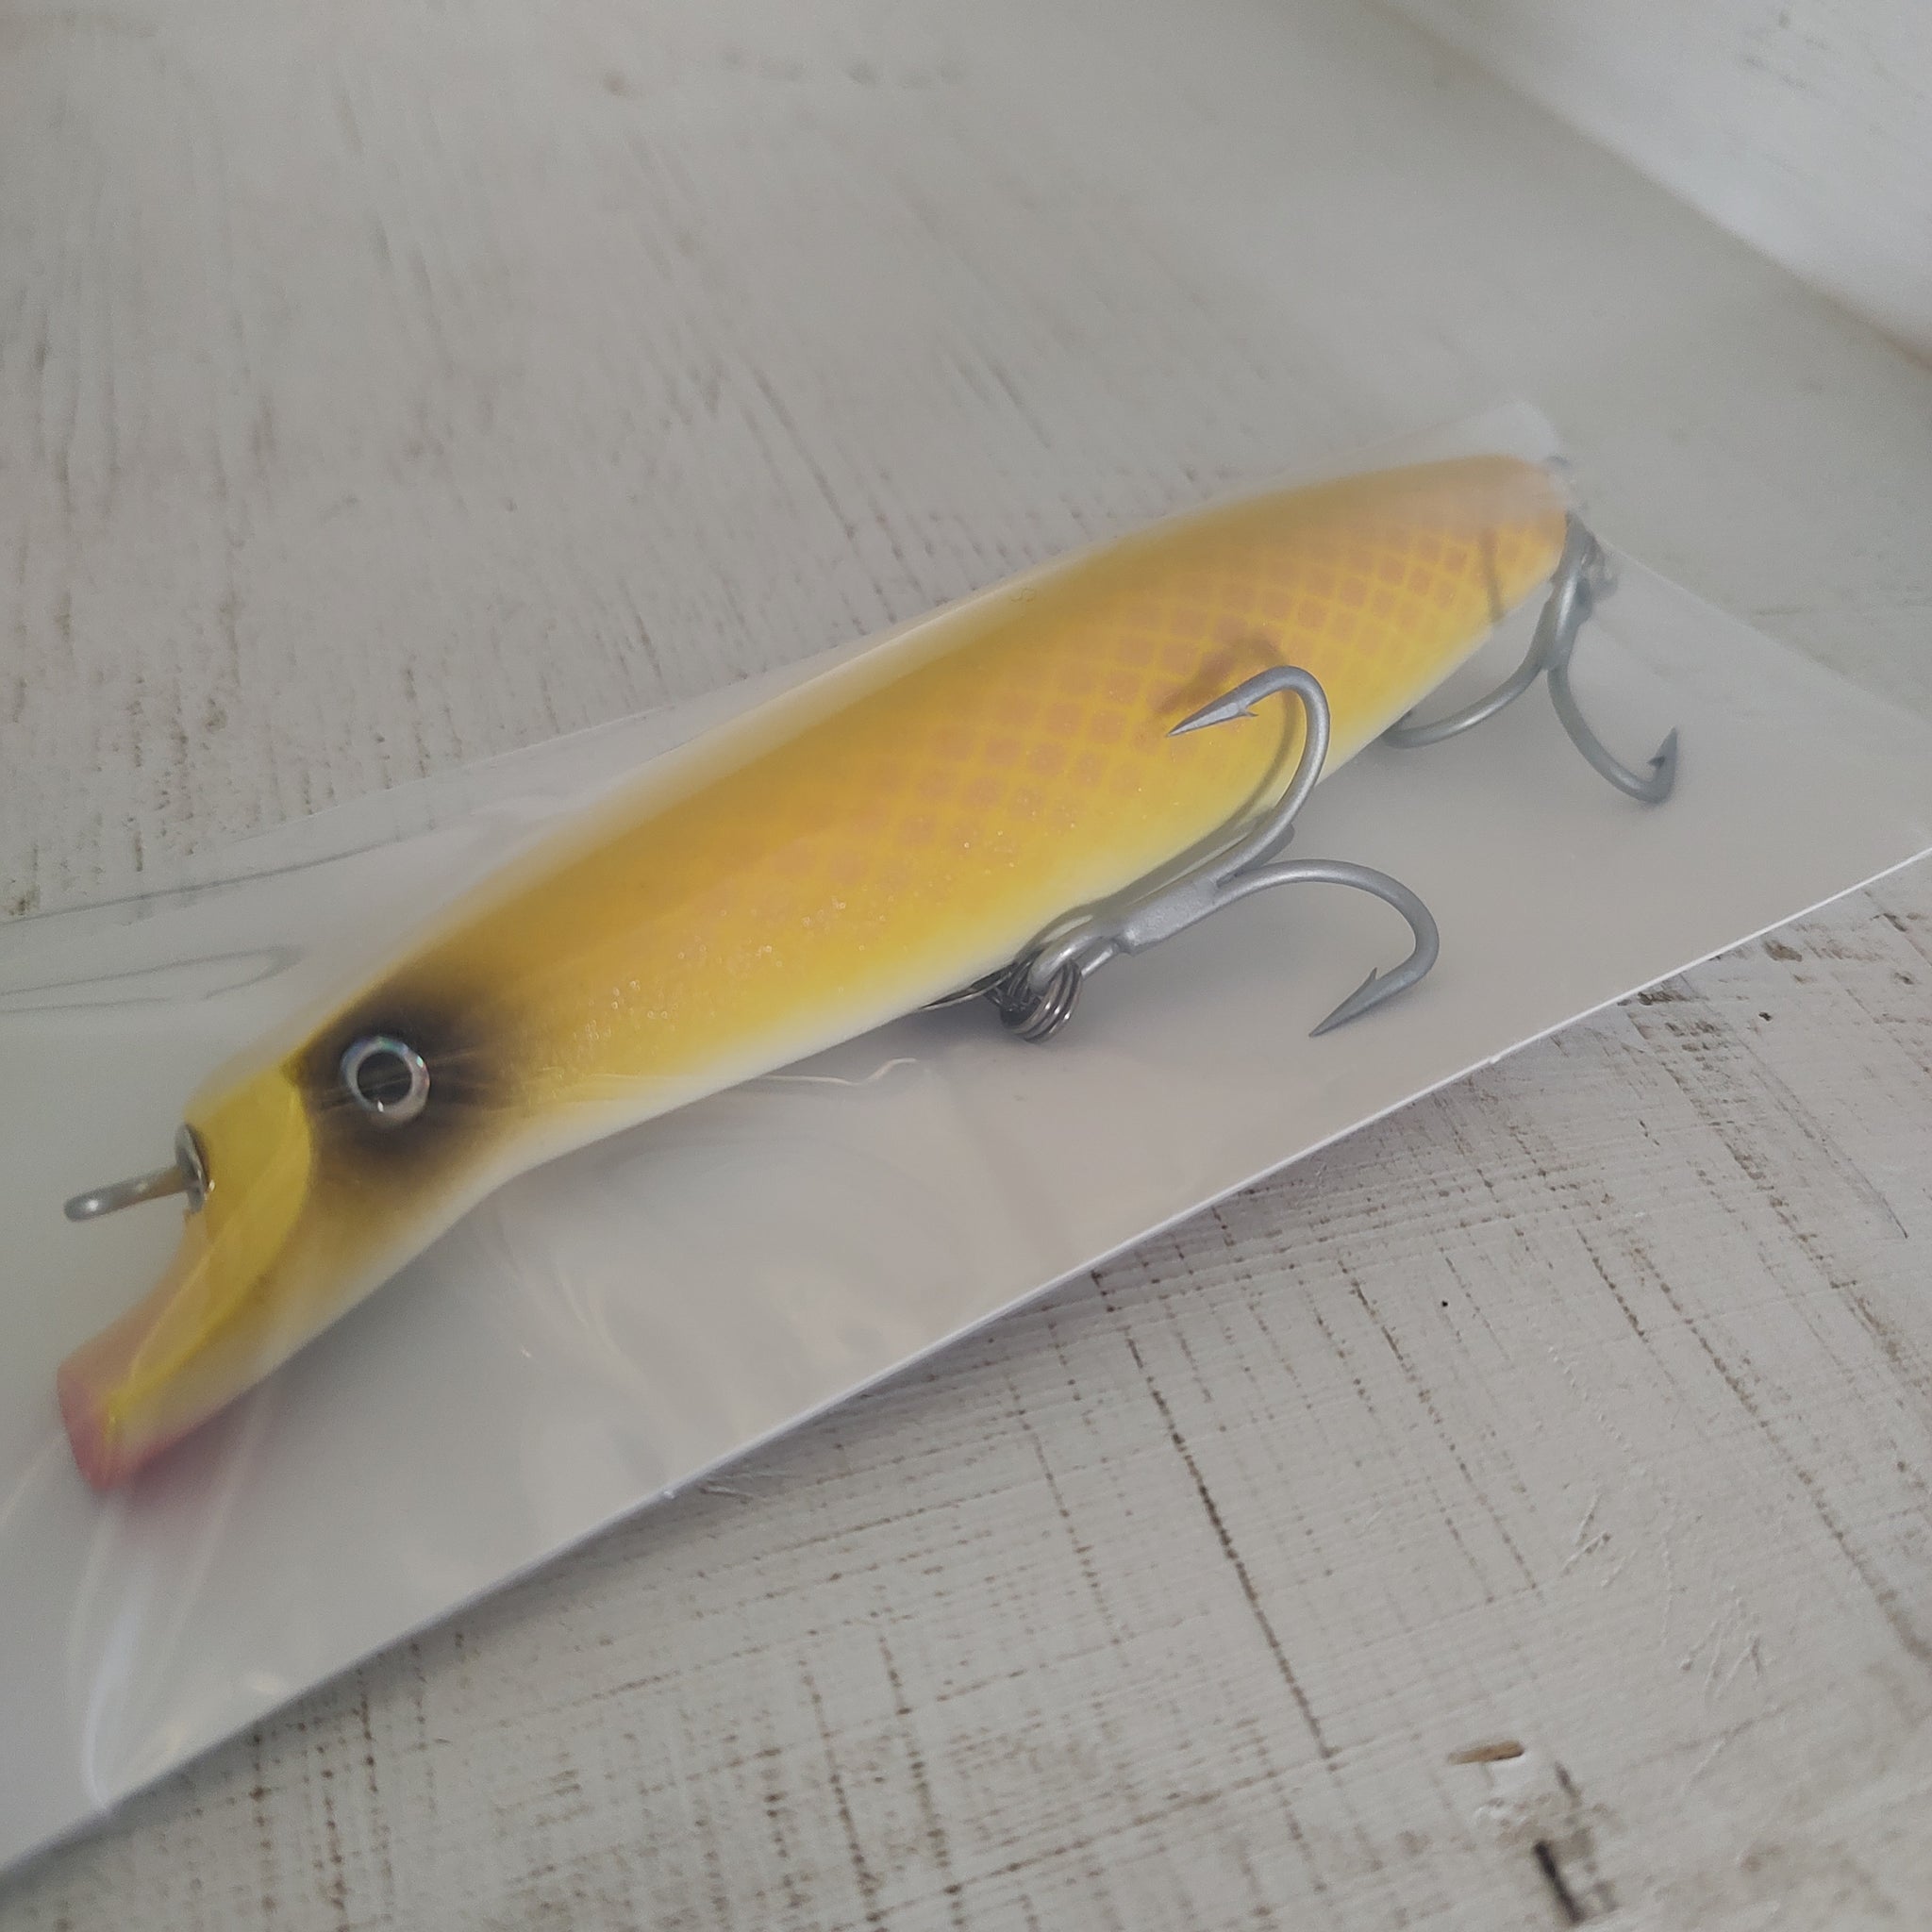 Sporting Wood Montauk Darter – Surfland Bait and Tackle